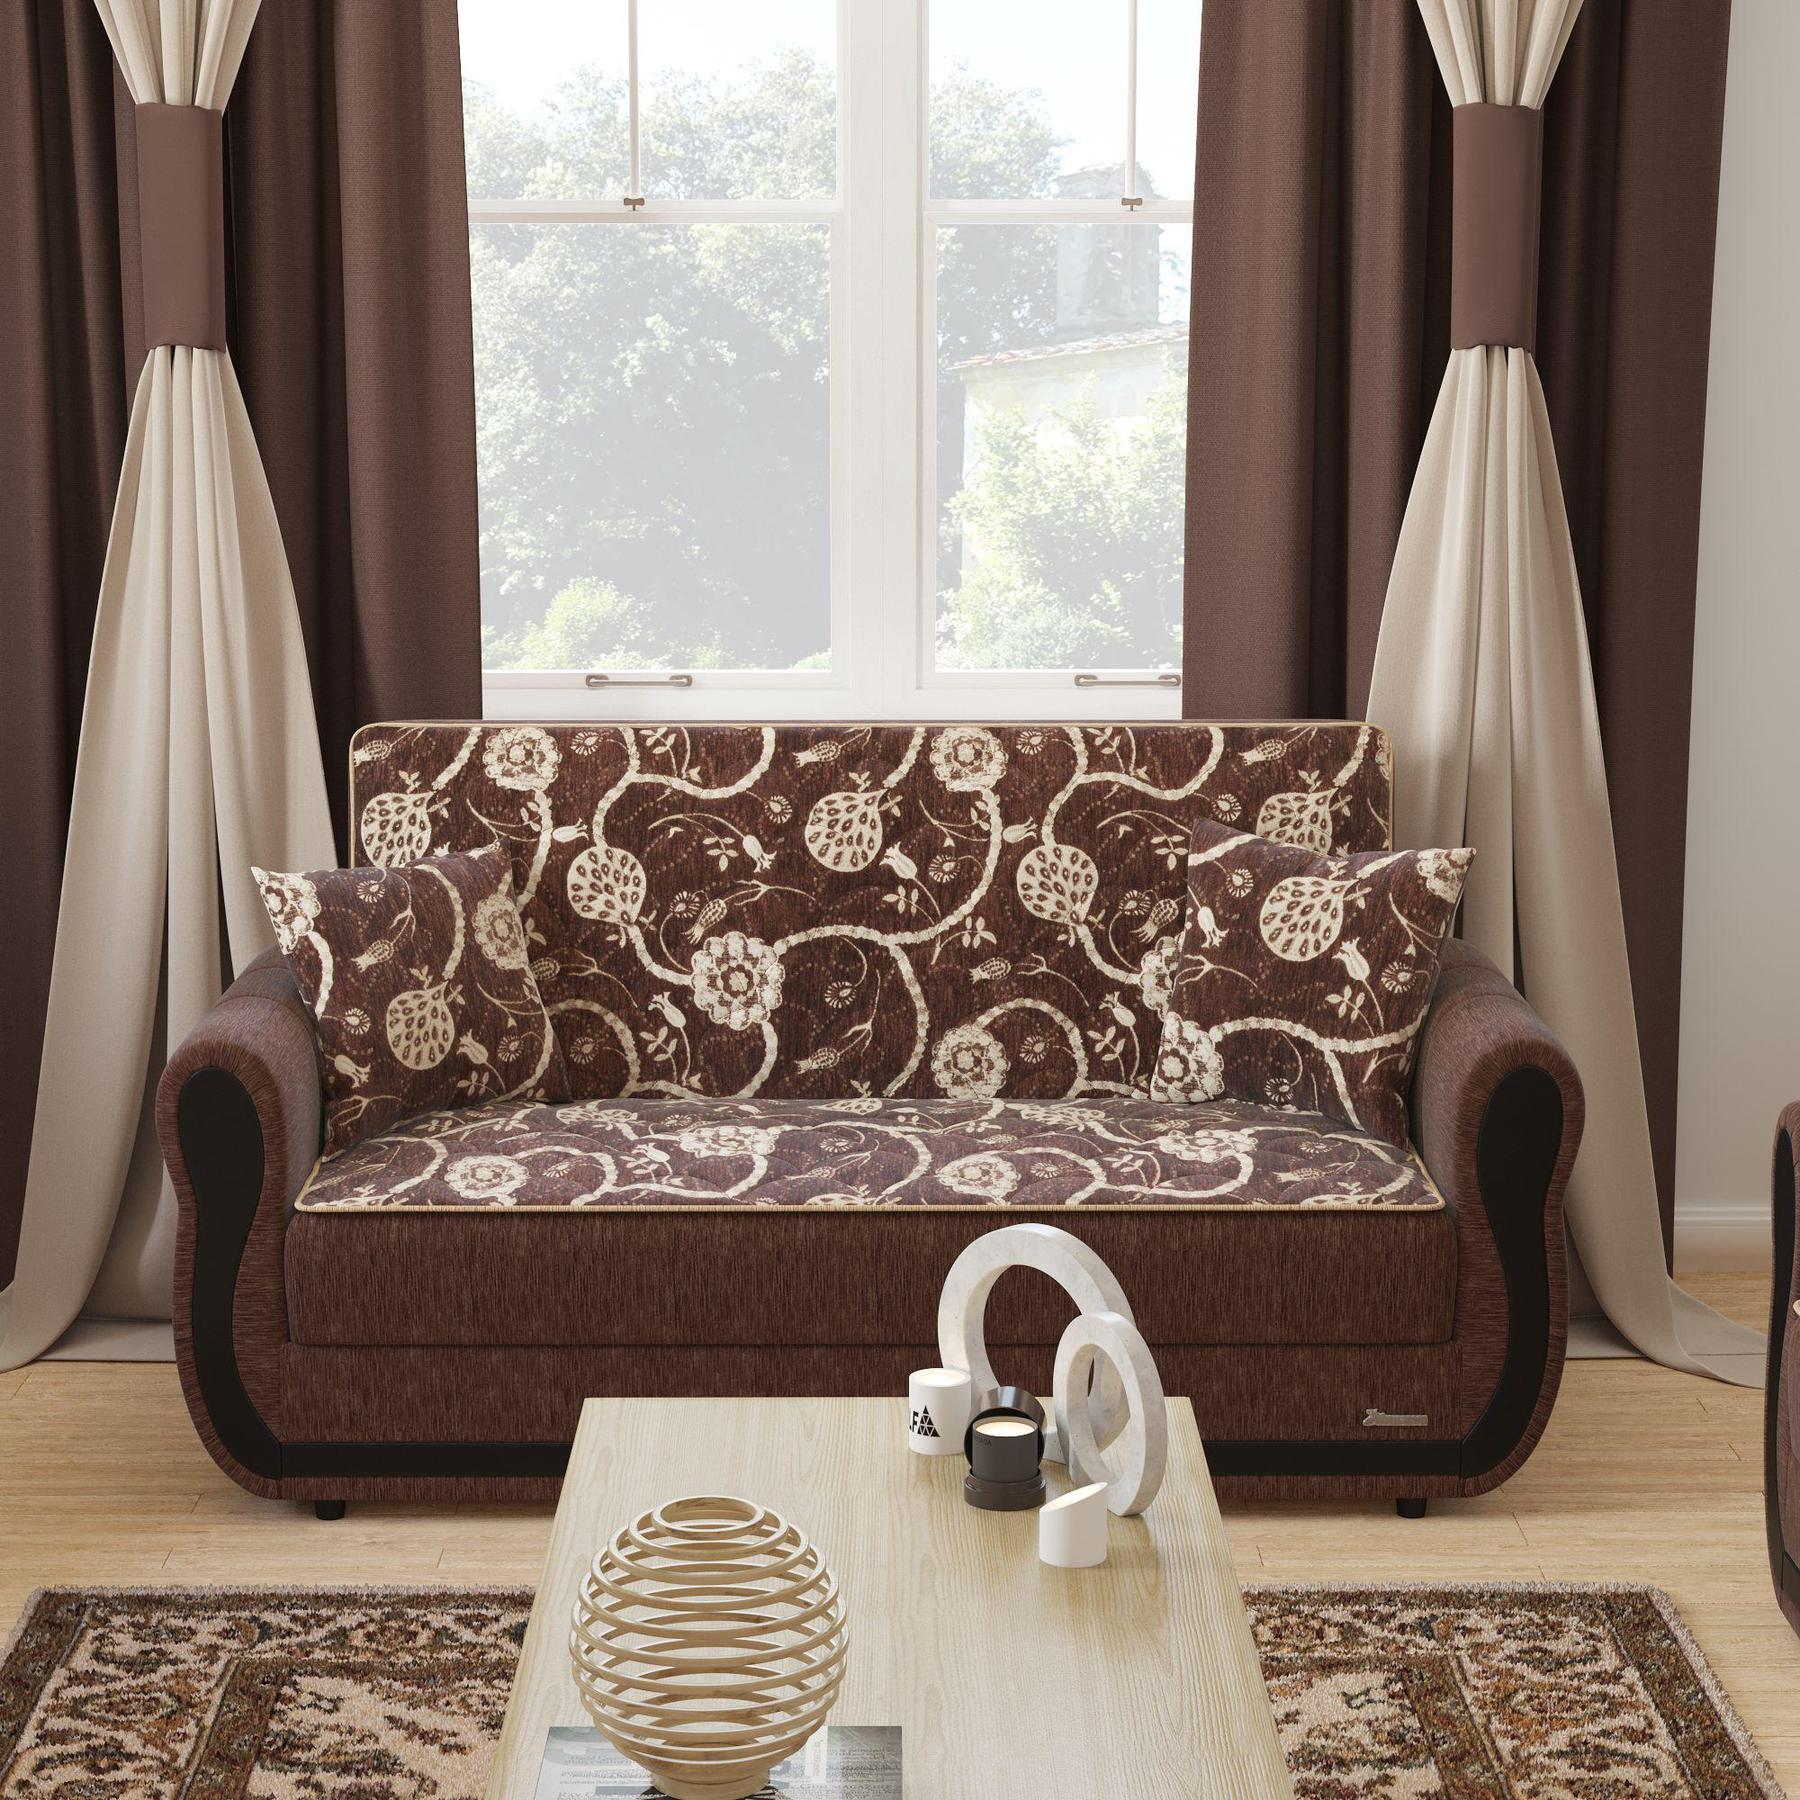 Modern design, Royal Brown , Chenille upholstered convertible sleeper Loveseat with underseat storage from Victoria Urban by Ottomanson in living room lifestyle setting by itself. This Loveseat measures 70 inches width by 28 inches depth by 38 inches height.